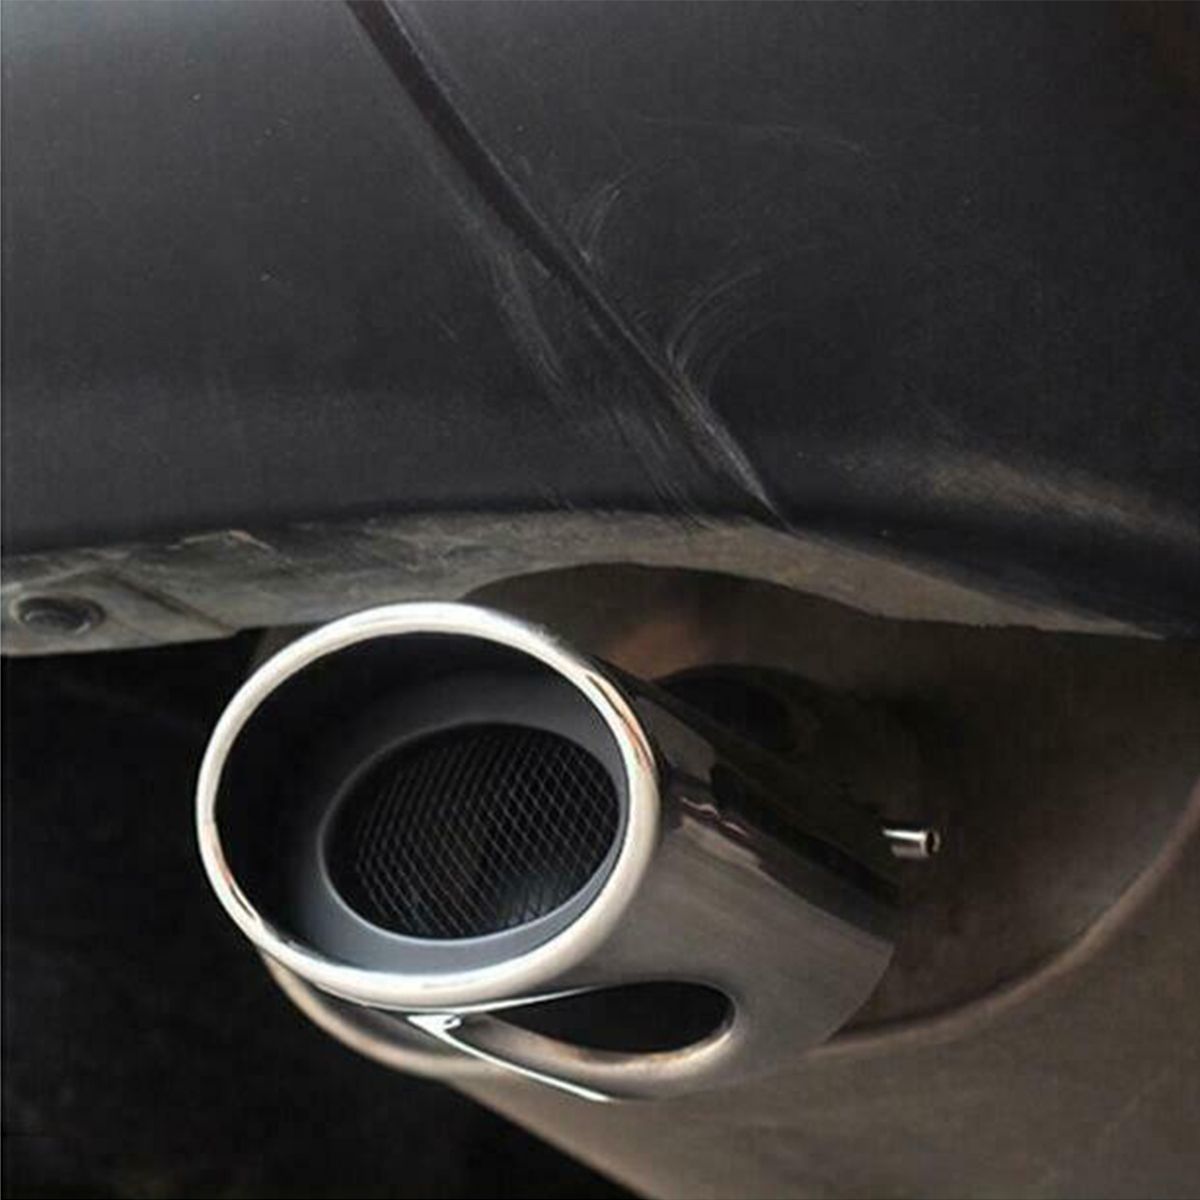 Car-Stainless-Steel-Tail-Exhaust-Muffler-Tip-End-Pipe-For-Toyota-Highlander-2017-2019-1681898